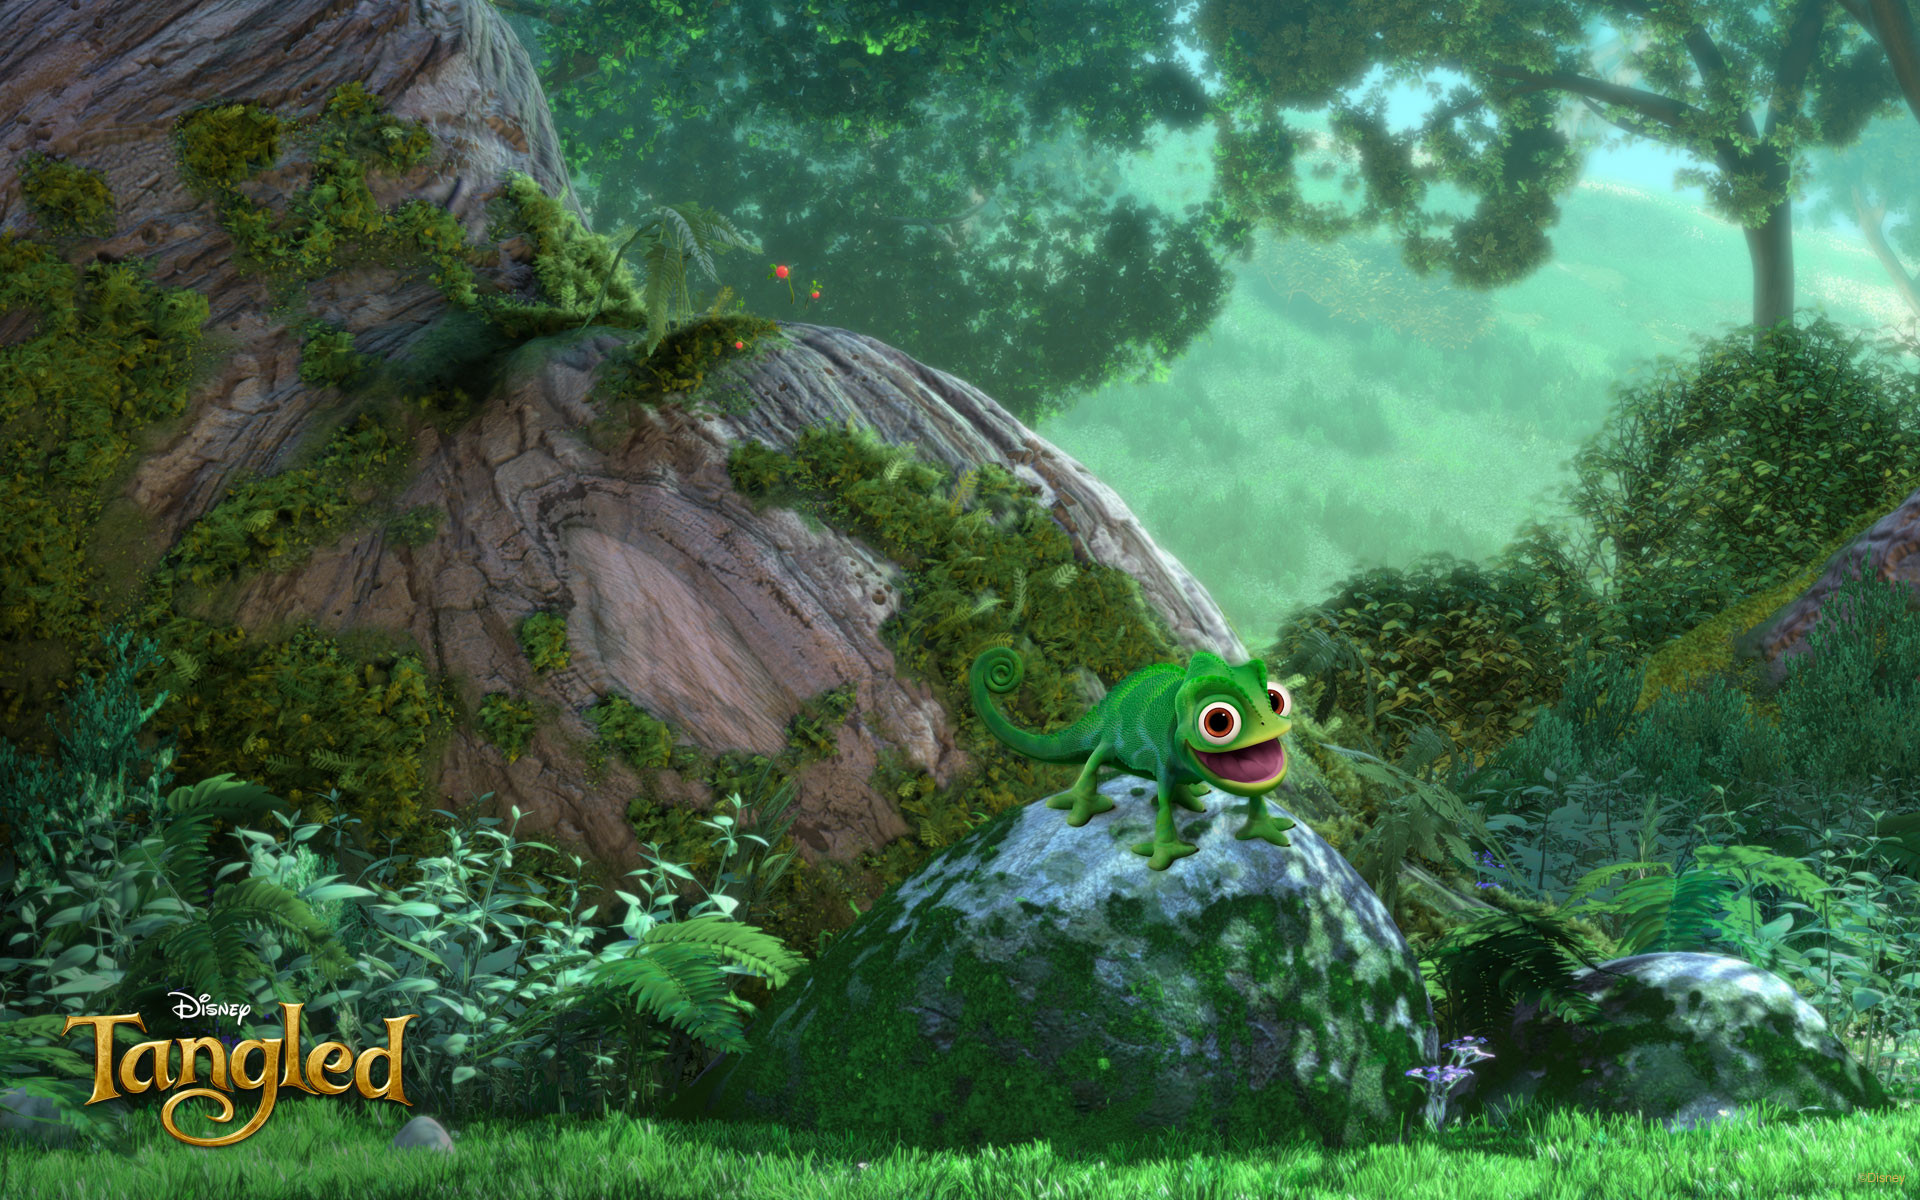 1920x1200 Pascal the chameleon lizard reptile perching on a rock from Disney's CG  animated movie Tangled wallpaper